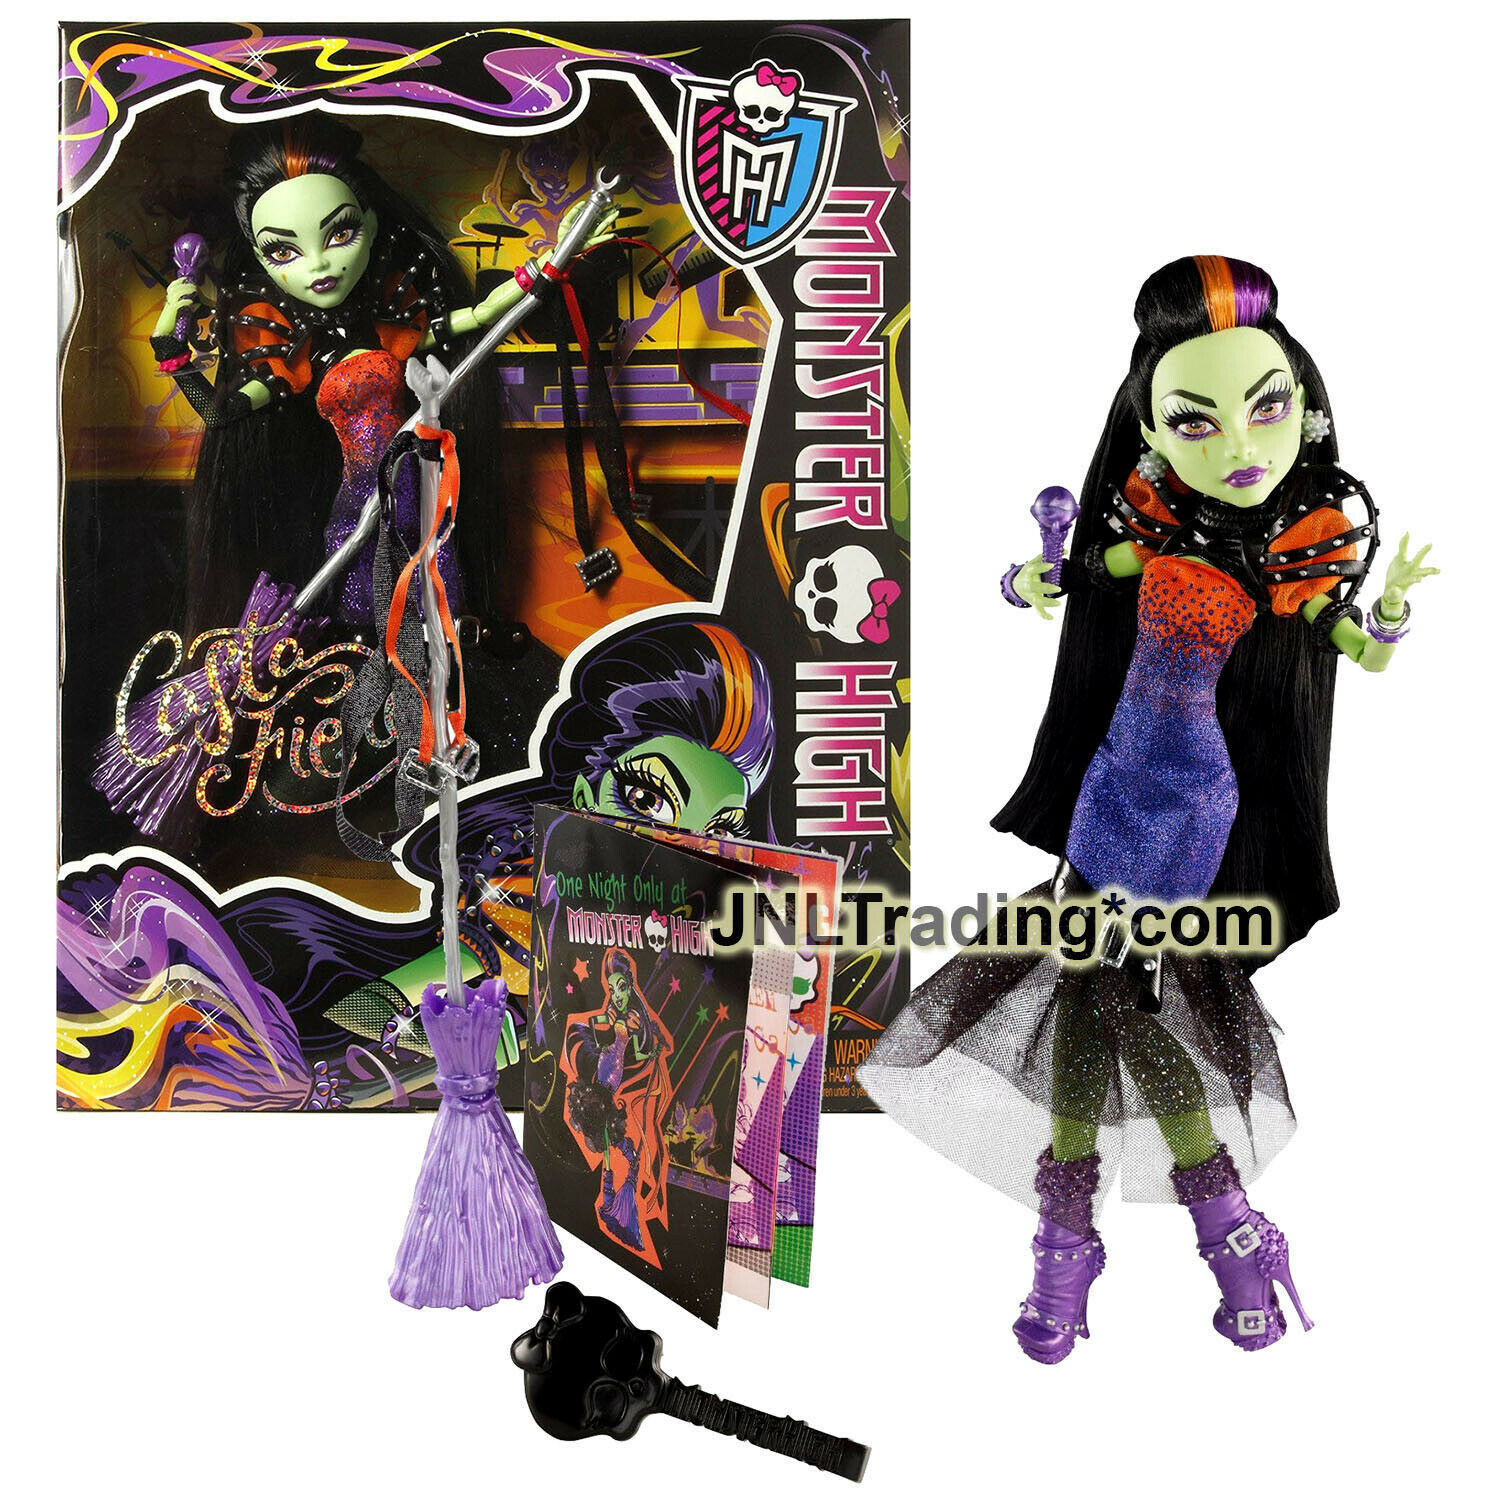 Primary image for Year 2014 Monster High Special Edition 11" Doll - Daughter of Circe CASTA FIERCE